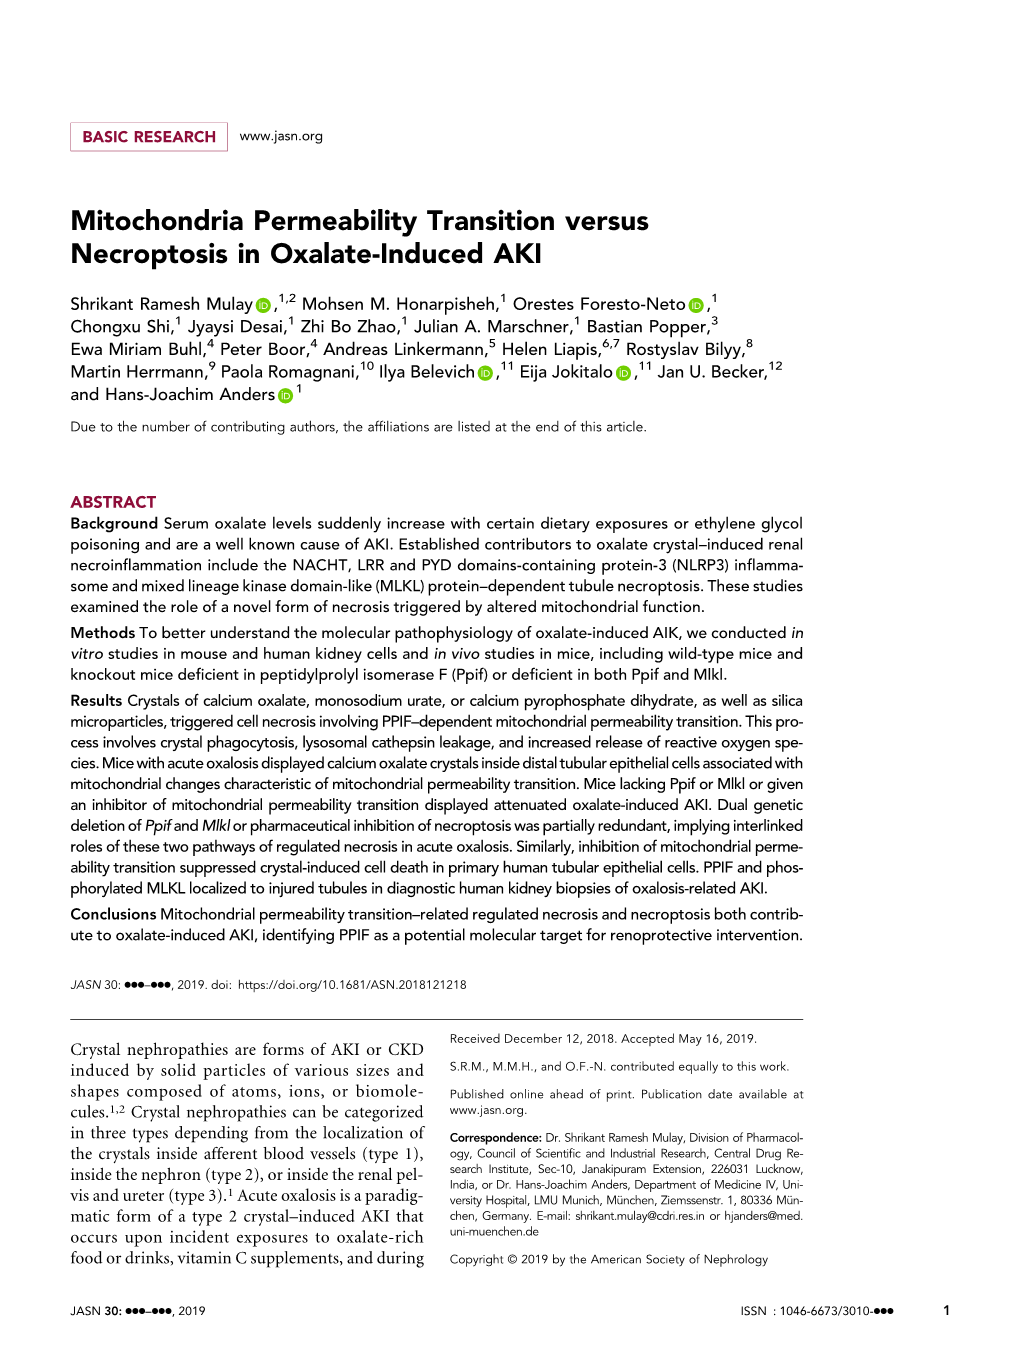 Mitochondria Permeability Transition Versus Necroptosis in Oxalate-Induced AKI